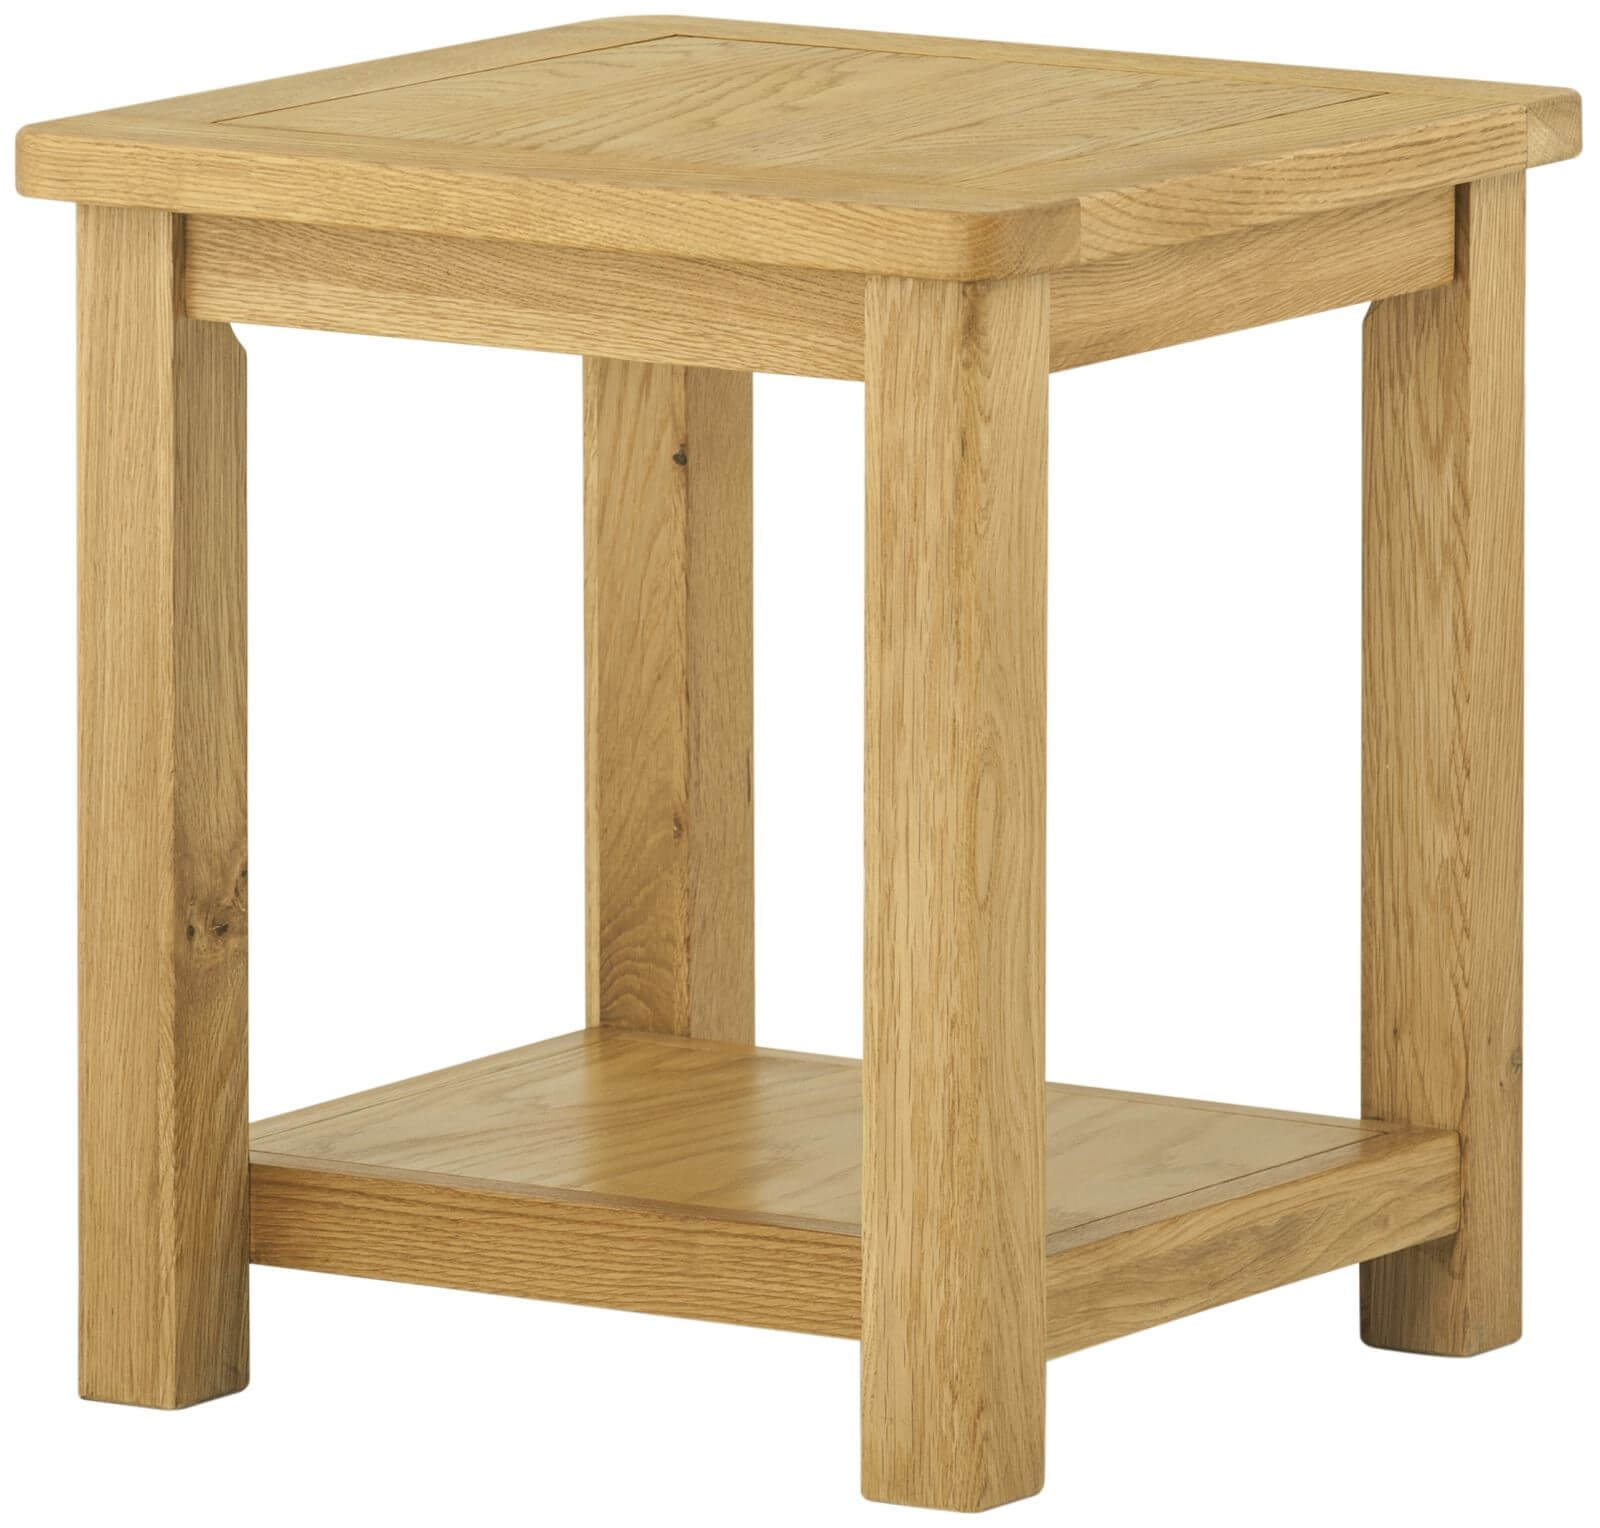 Showing image for Seattle lamp table - oak